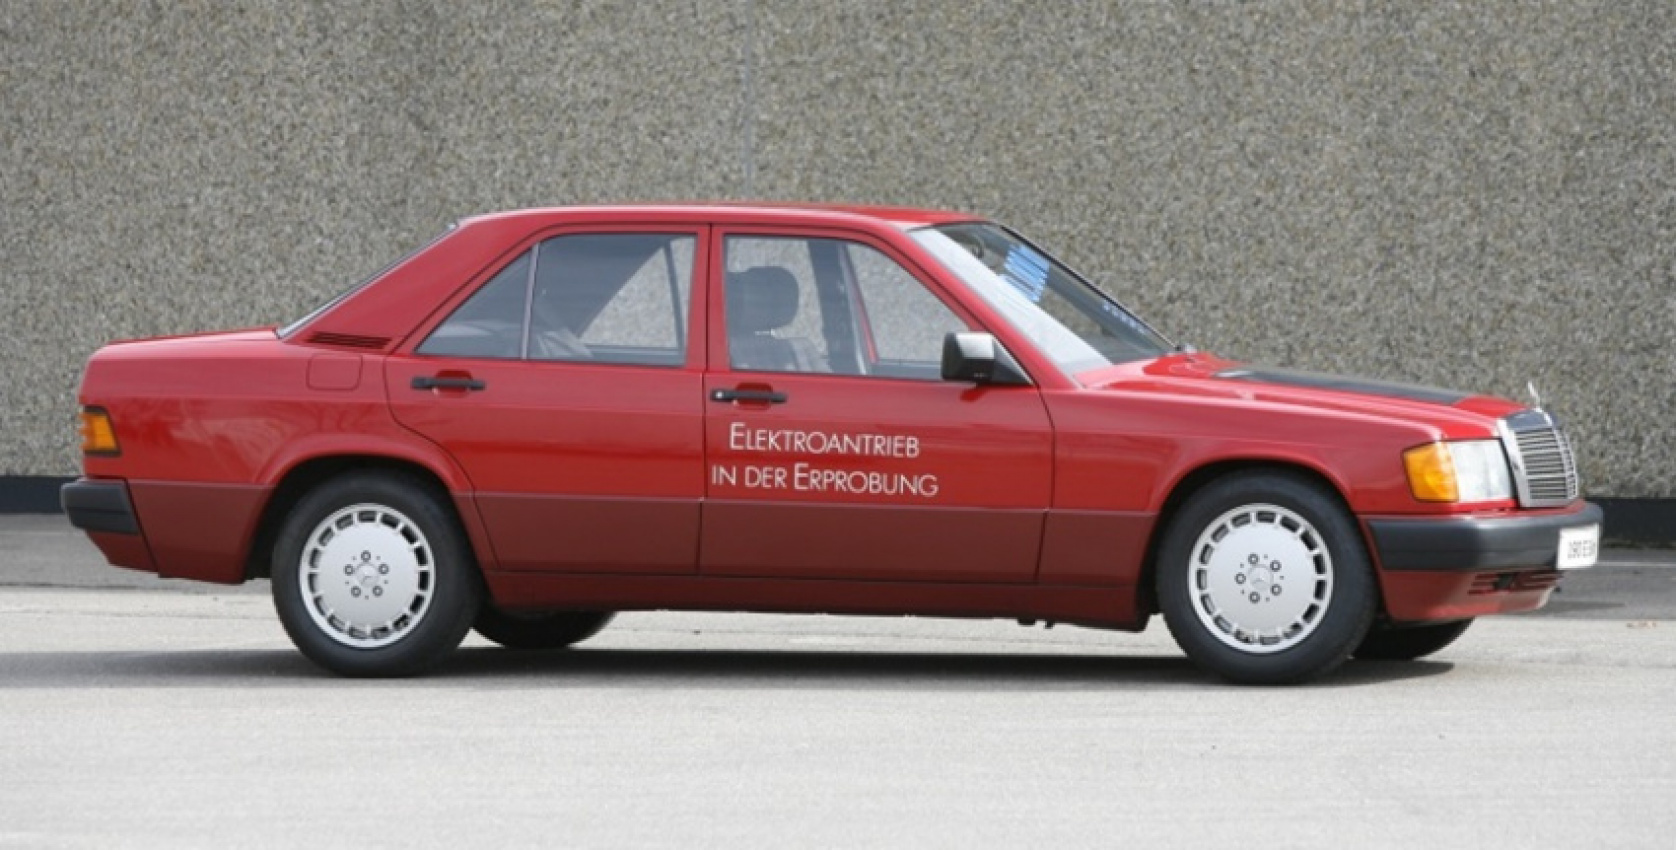 autos, cars, mercedes-benz, electric vehicles, electrification, mercedes, mercedes-benz 190e elektro, mercedes-benz eq, mercedes-benz eqc, 30 years ago, mercedes-benz already had a practical ev based on the 190 model